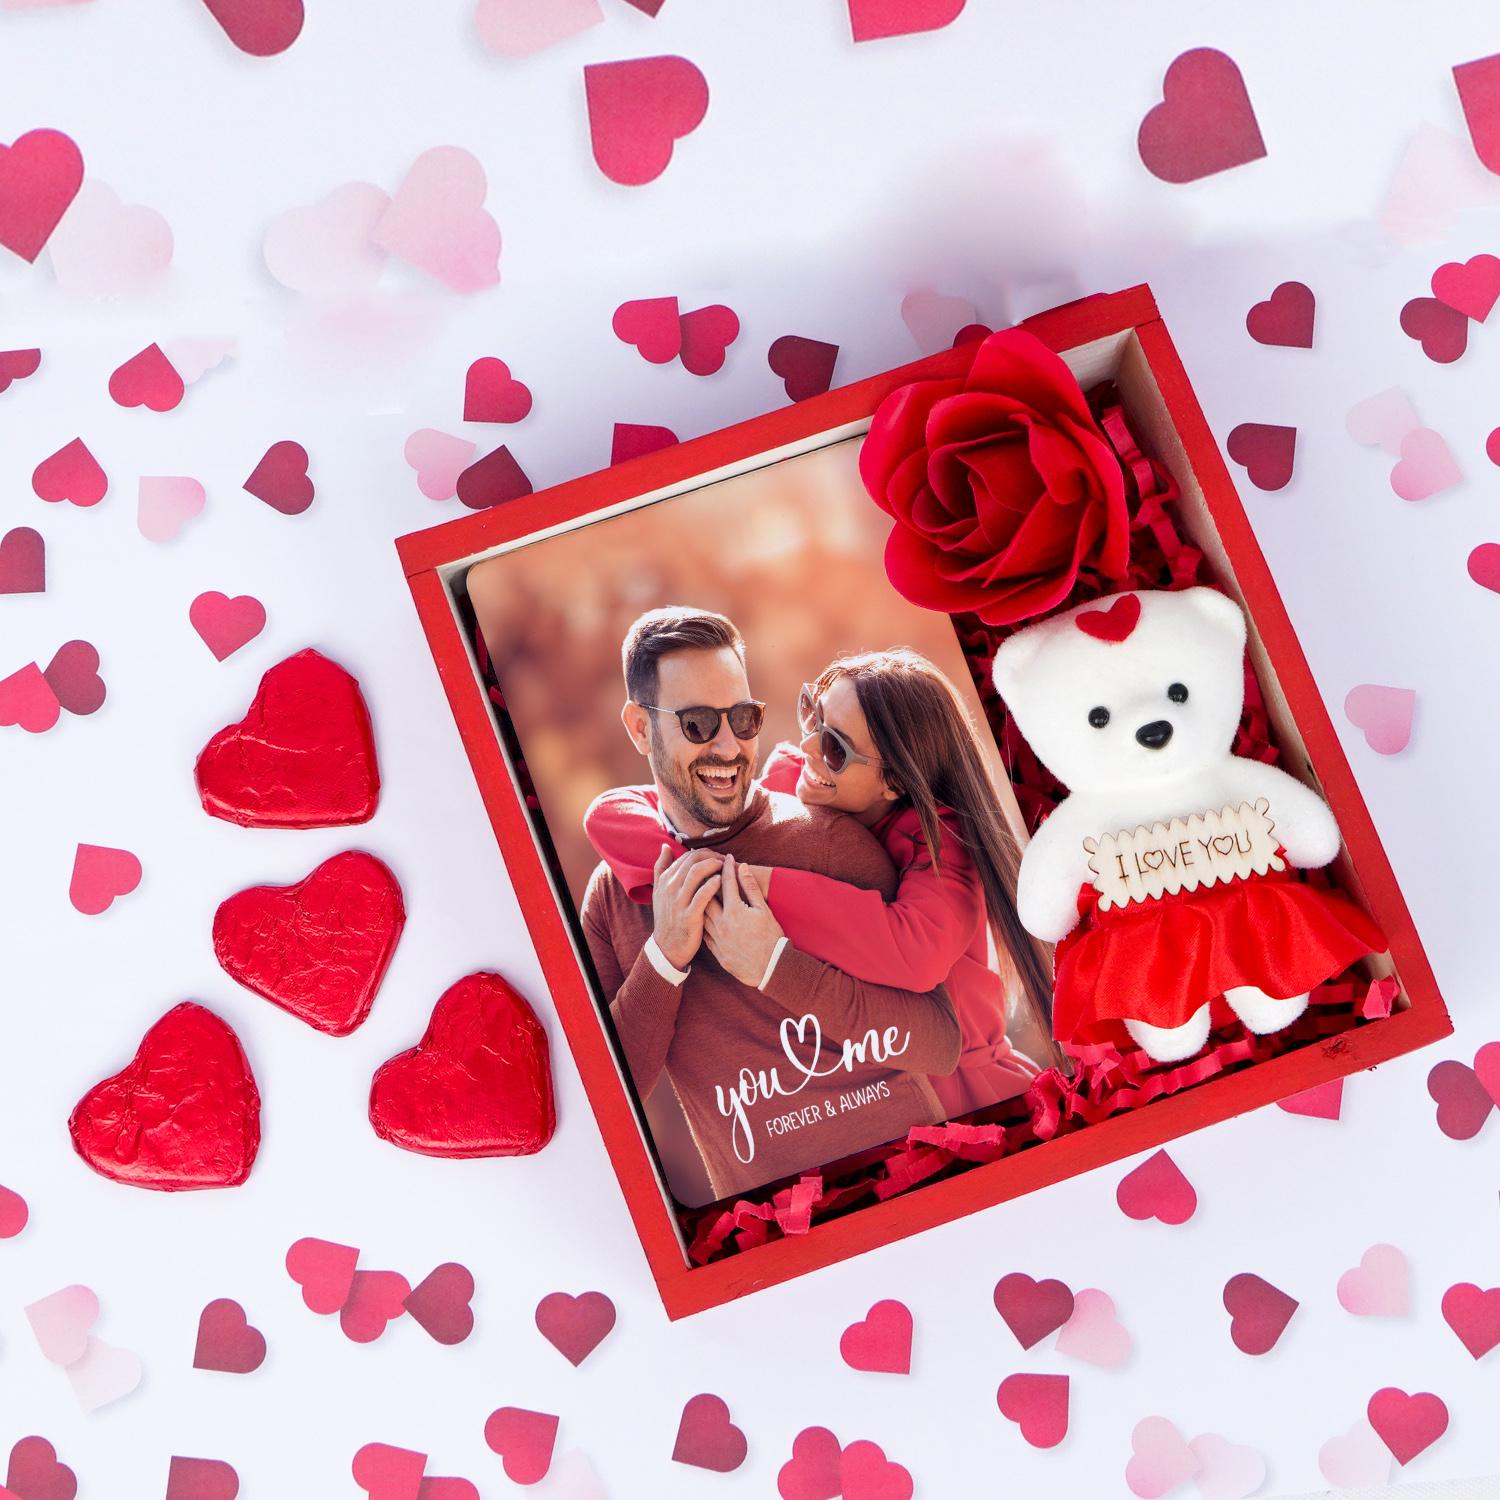 Choose The Most Innovative Valentine Gift for Boyfriend and Make Him Feel  Special - Presto Gifts Blog